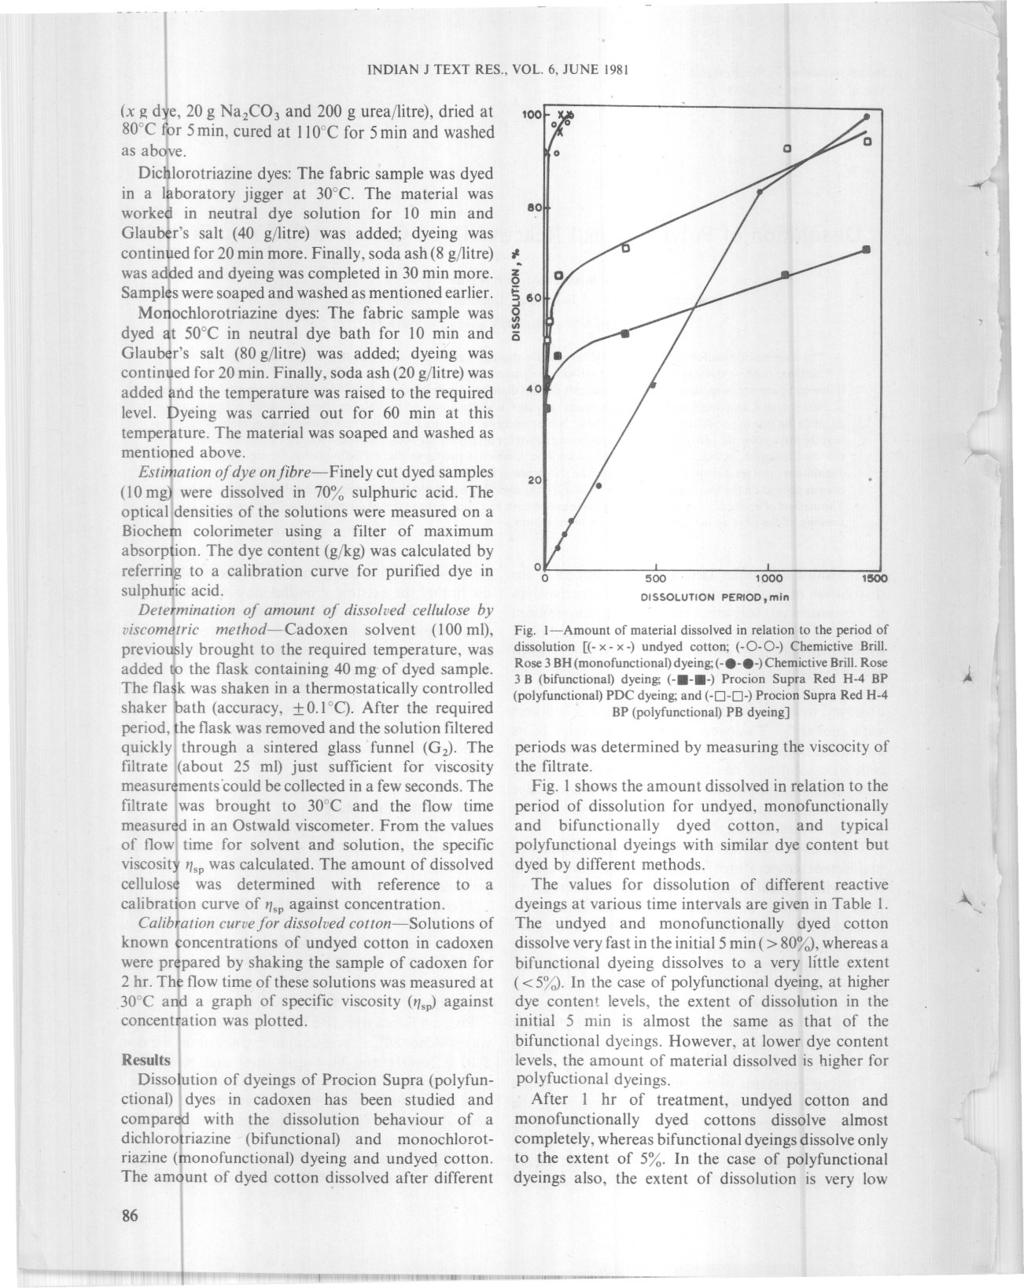 INDIAN J TEXT RES., VOL. 6, JUNE 1981 (x g dye, 20 g Na2C03 and 200 g urea/litre), dried at 80 C for S min, cured at 110 C for 5 min and washed as above.